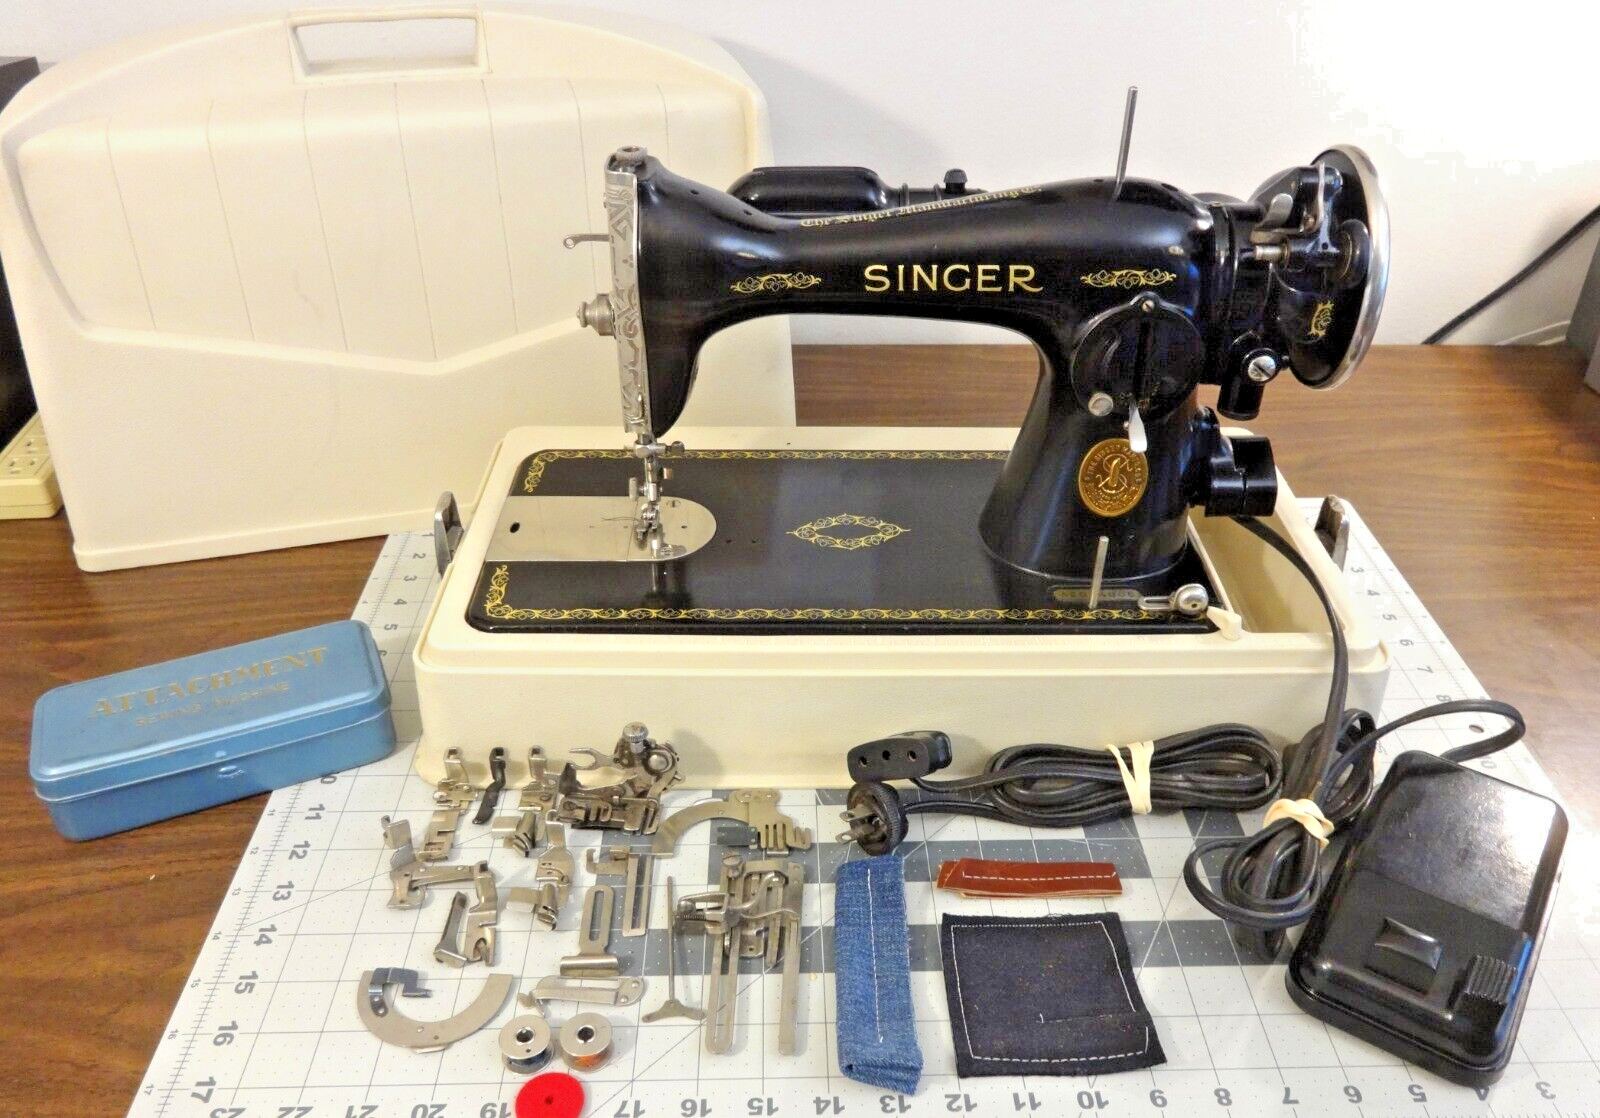 SUPERB 1935 SINGER 15-91 Gear Drive Sewing Machine w/Case, Extras - SERVICED